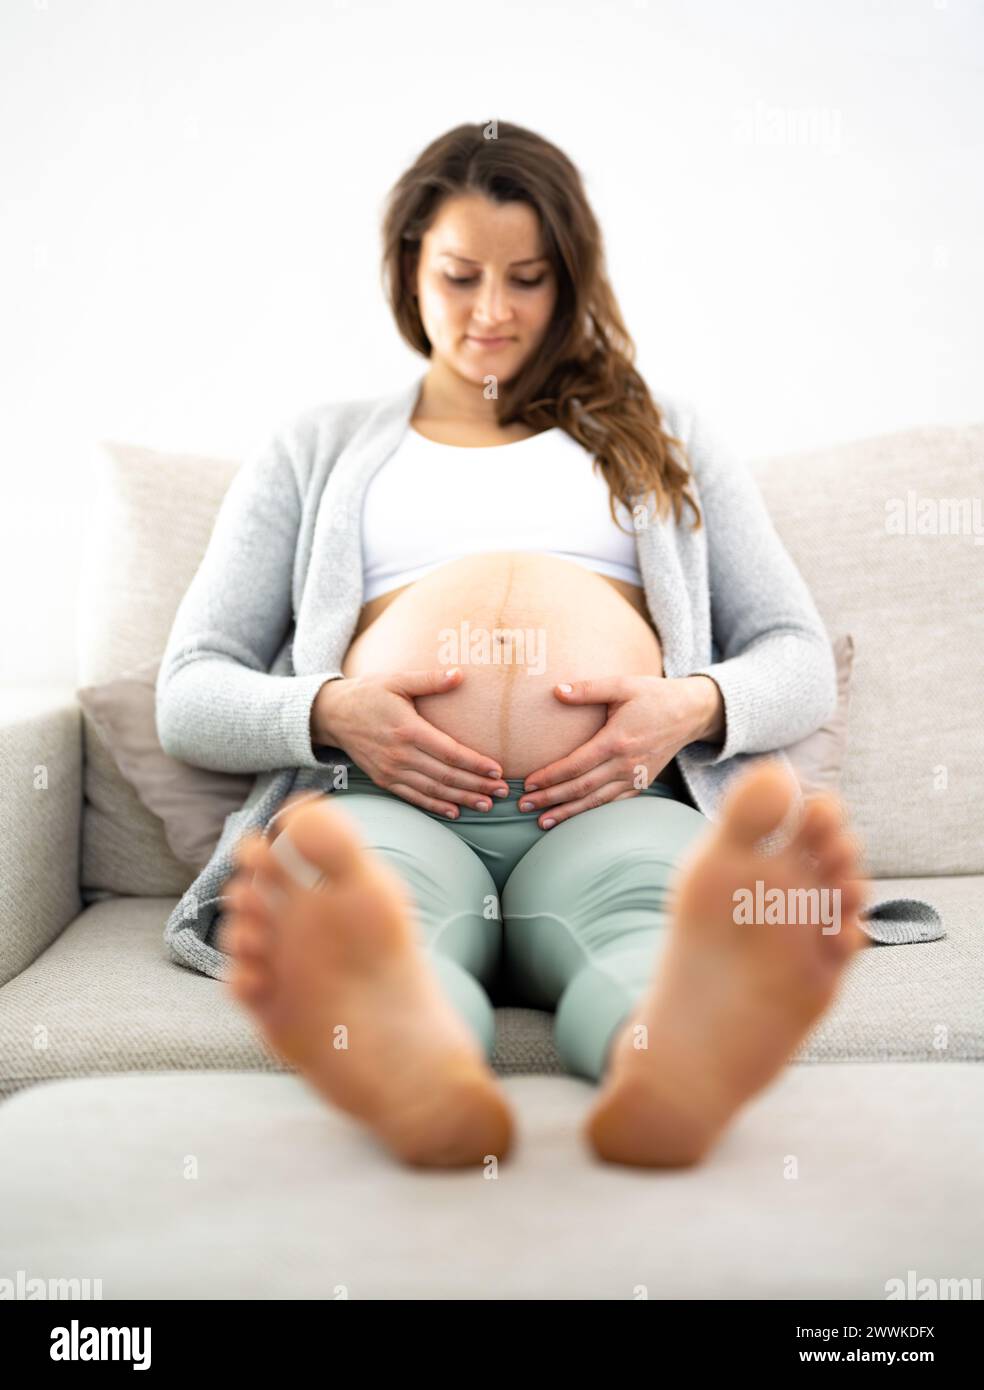 Description: Frontal view of smiling woman sitting on a sofa proudly holding her belly in expectation of the baby during the last stage of pregnancy. Stock Photo